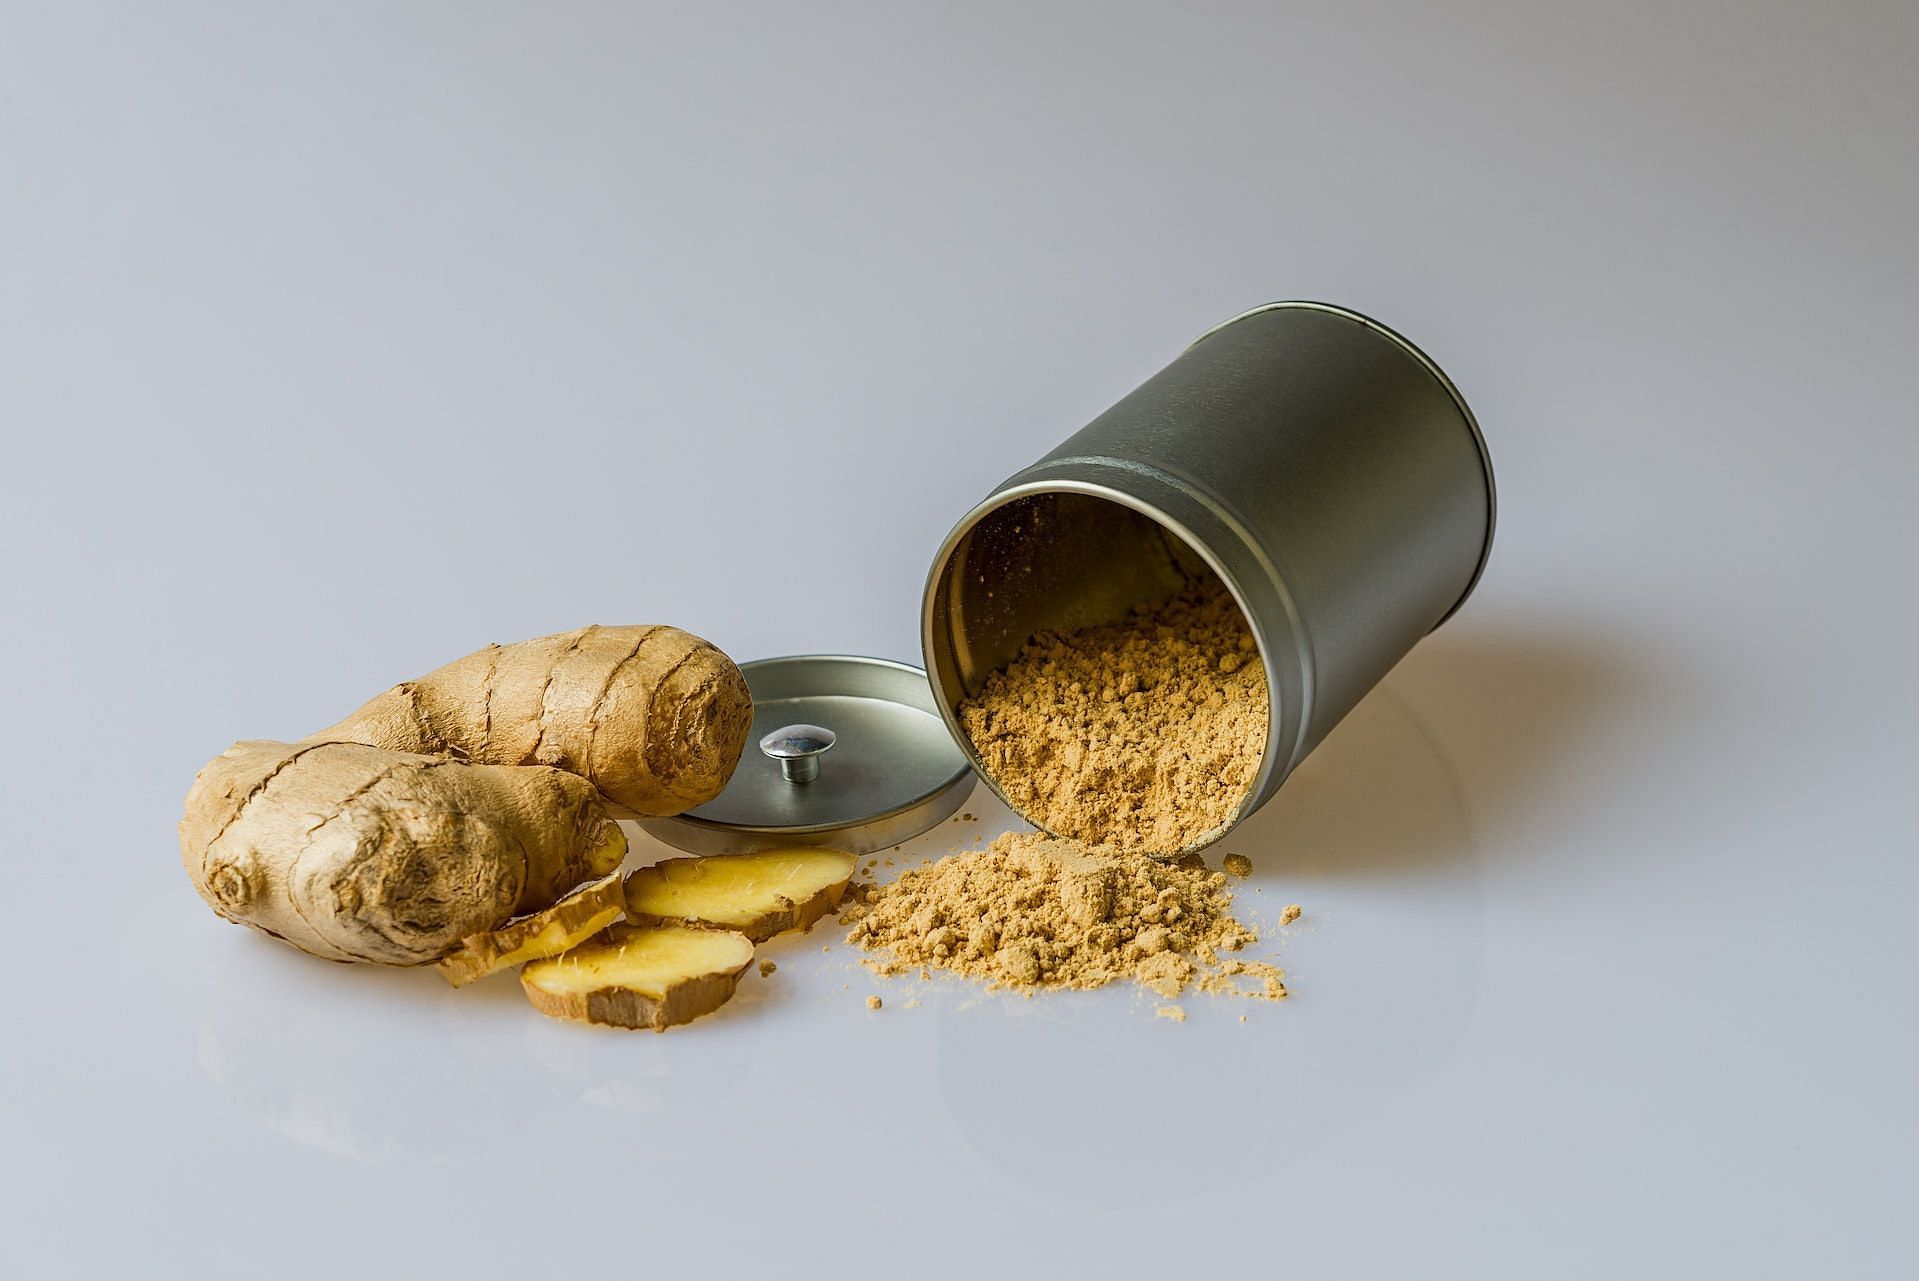 Ginger is one of the best herbs for high blood pressure. (Photo via Pexels/Pixabay)